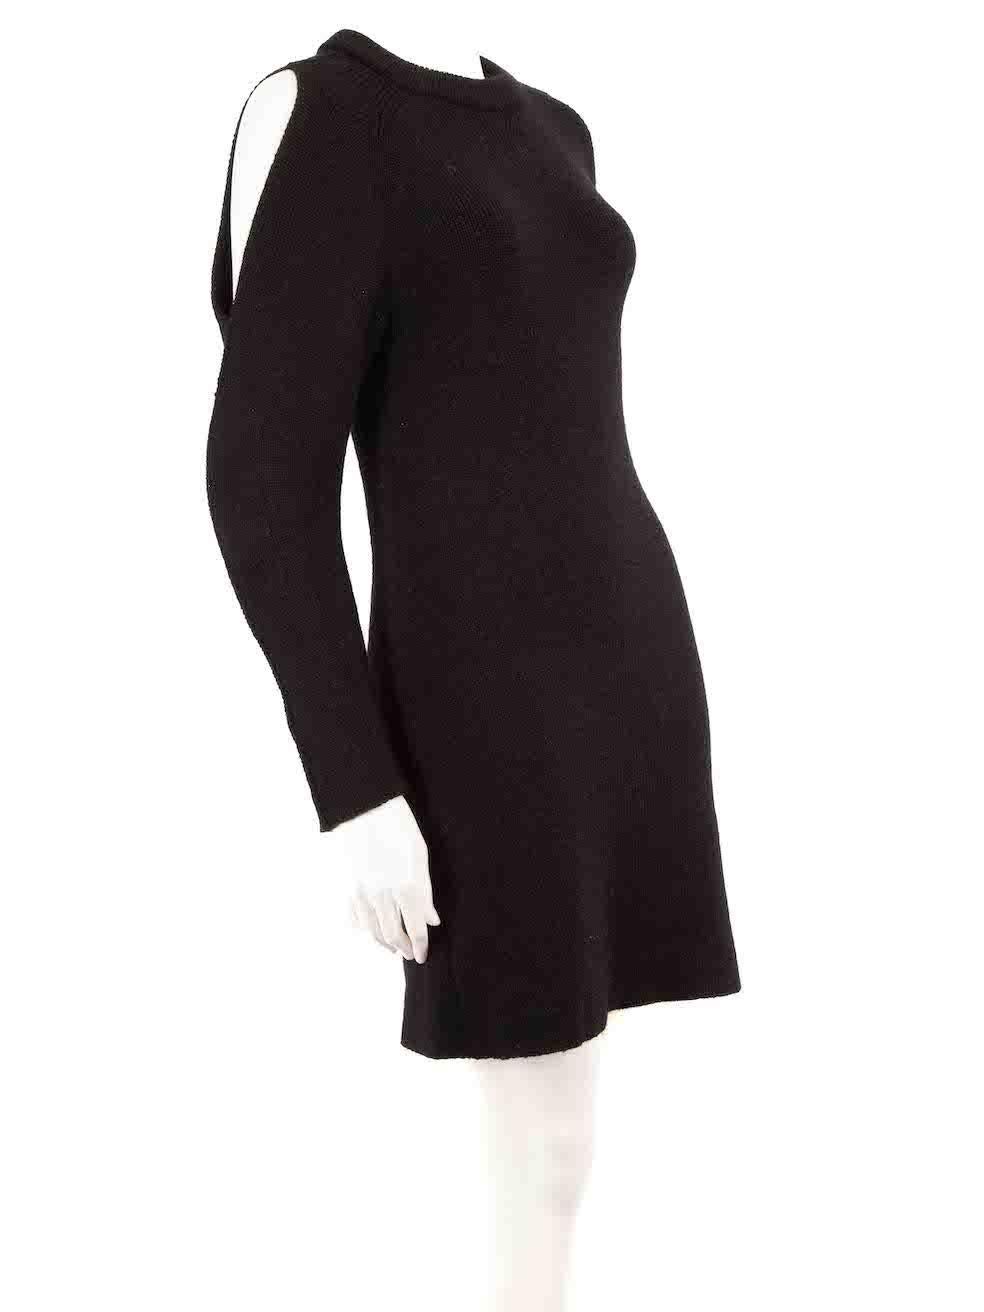 CONDITION is Very good. Hardly any visible wear to dress is evident on this used Chloé designer resale item.
 
 Details
 Black
 Wool
 Mini dress
 Round neckline
 Cold shoulder detail
 Knitted and stretchy
 
 Made in Italy
 Composition
 47% Wool, 47%